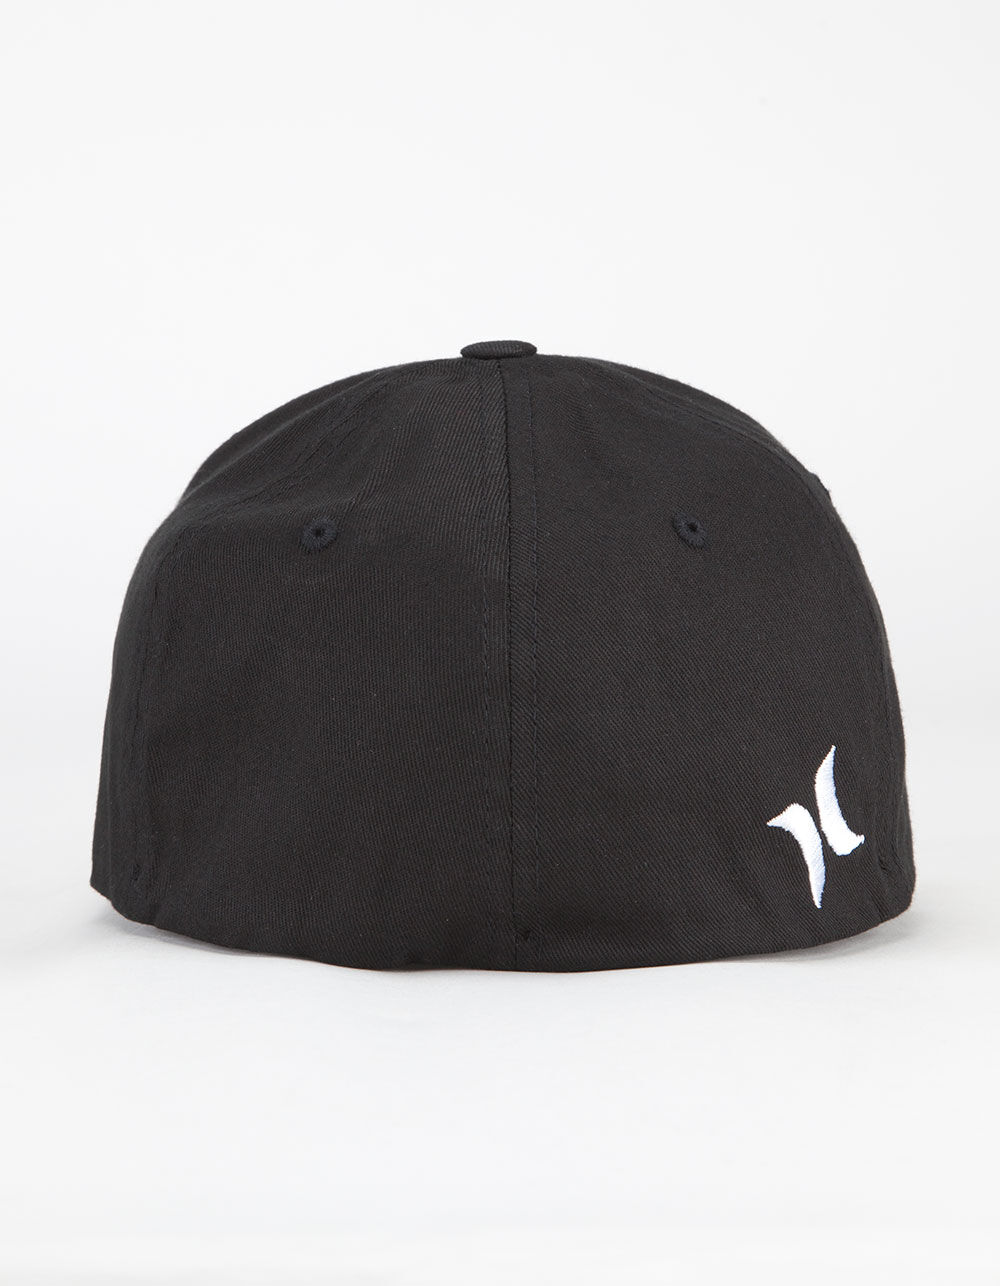 HURLEY Corp Mens Hat image number 1